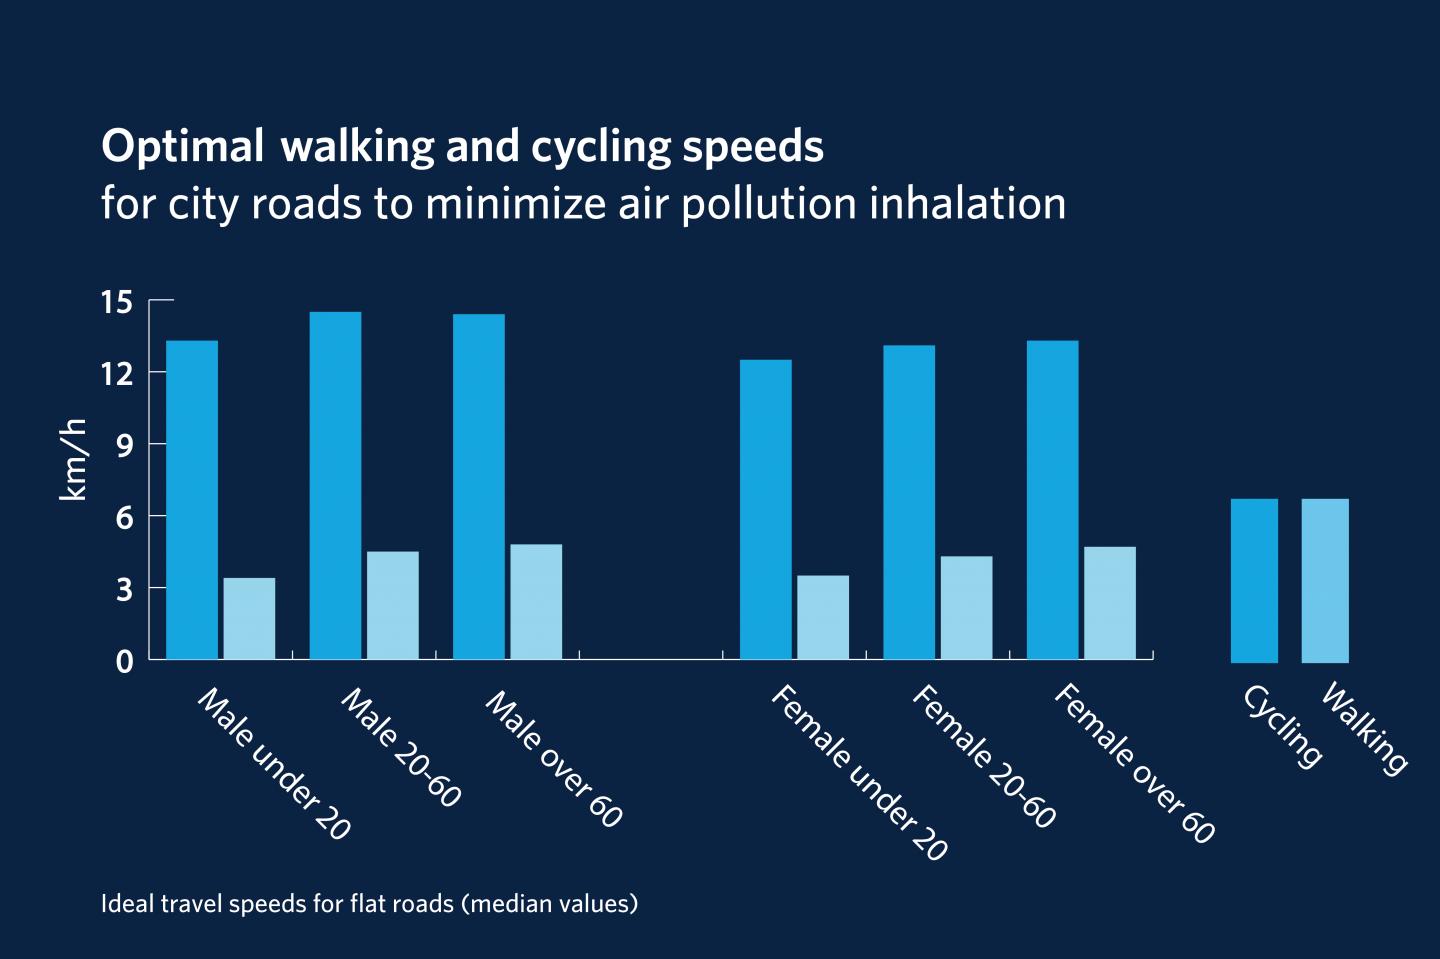 Walking and Cycling Speeds on City Roads